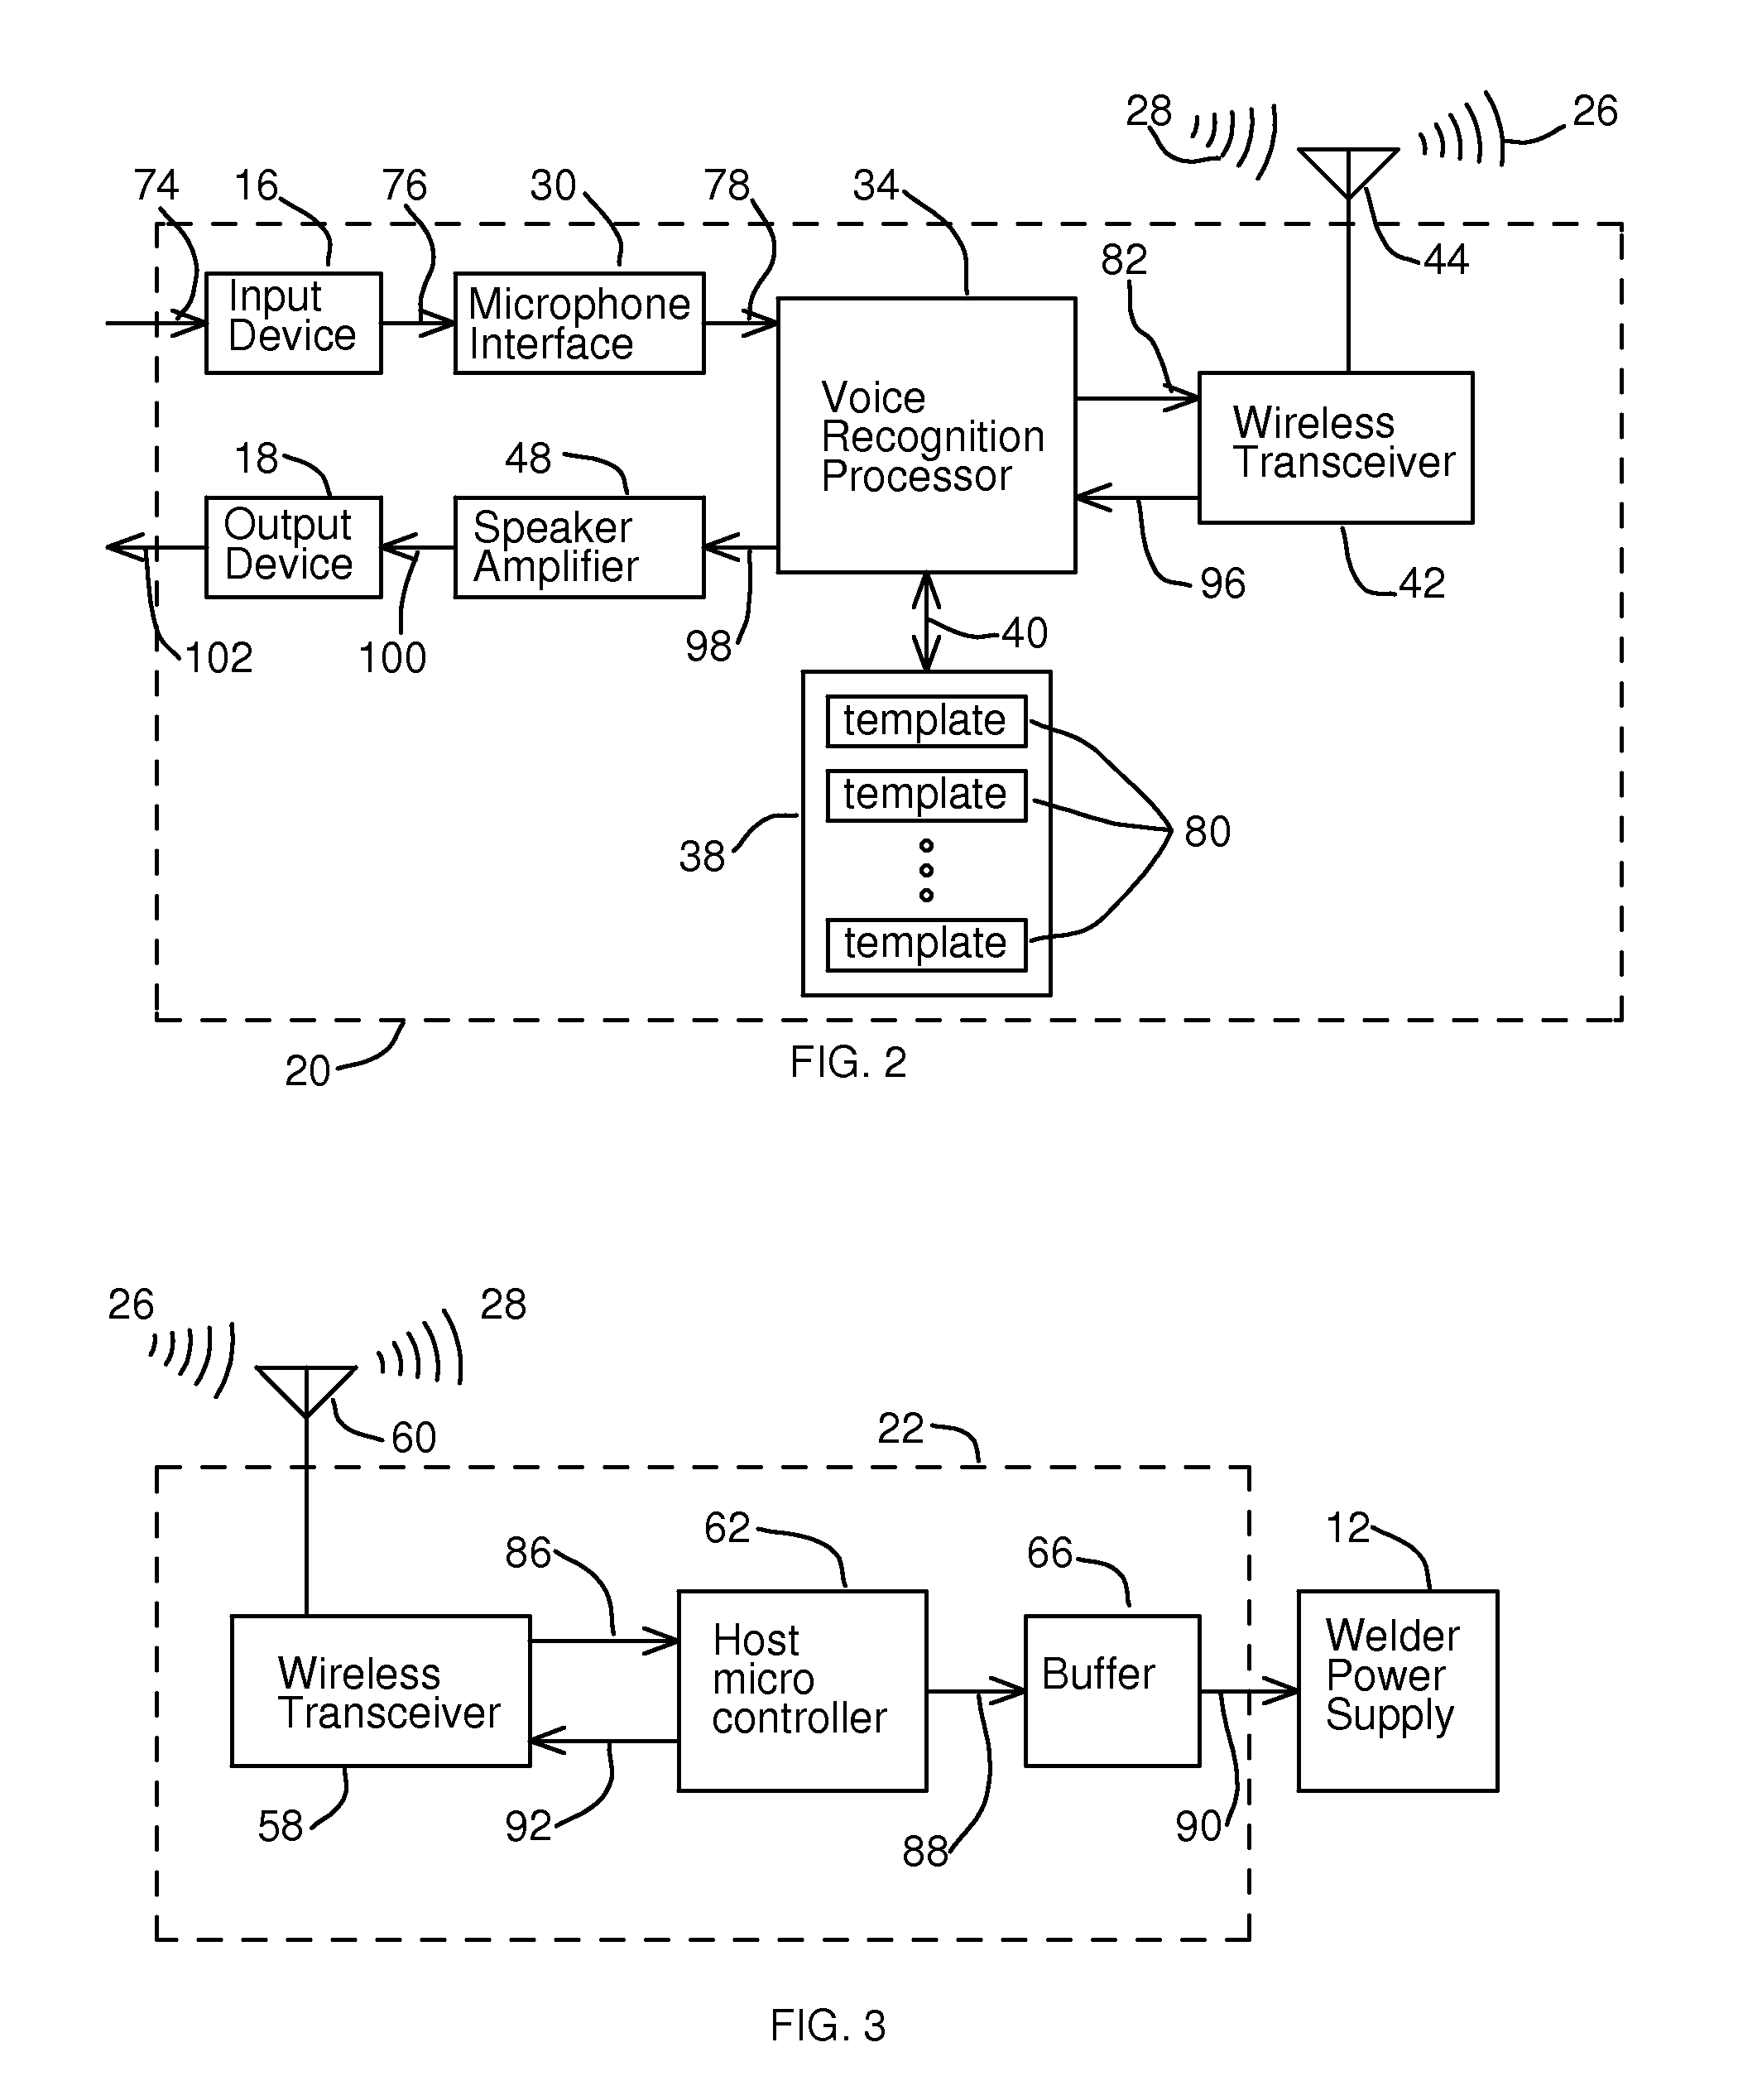 Wireless voice recognition control system for controlling a welder power supply by voice commands